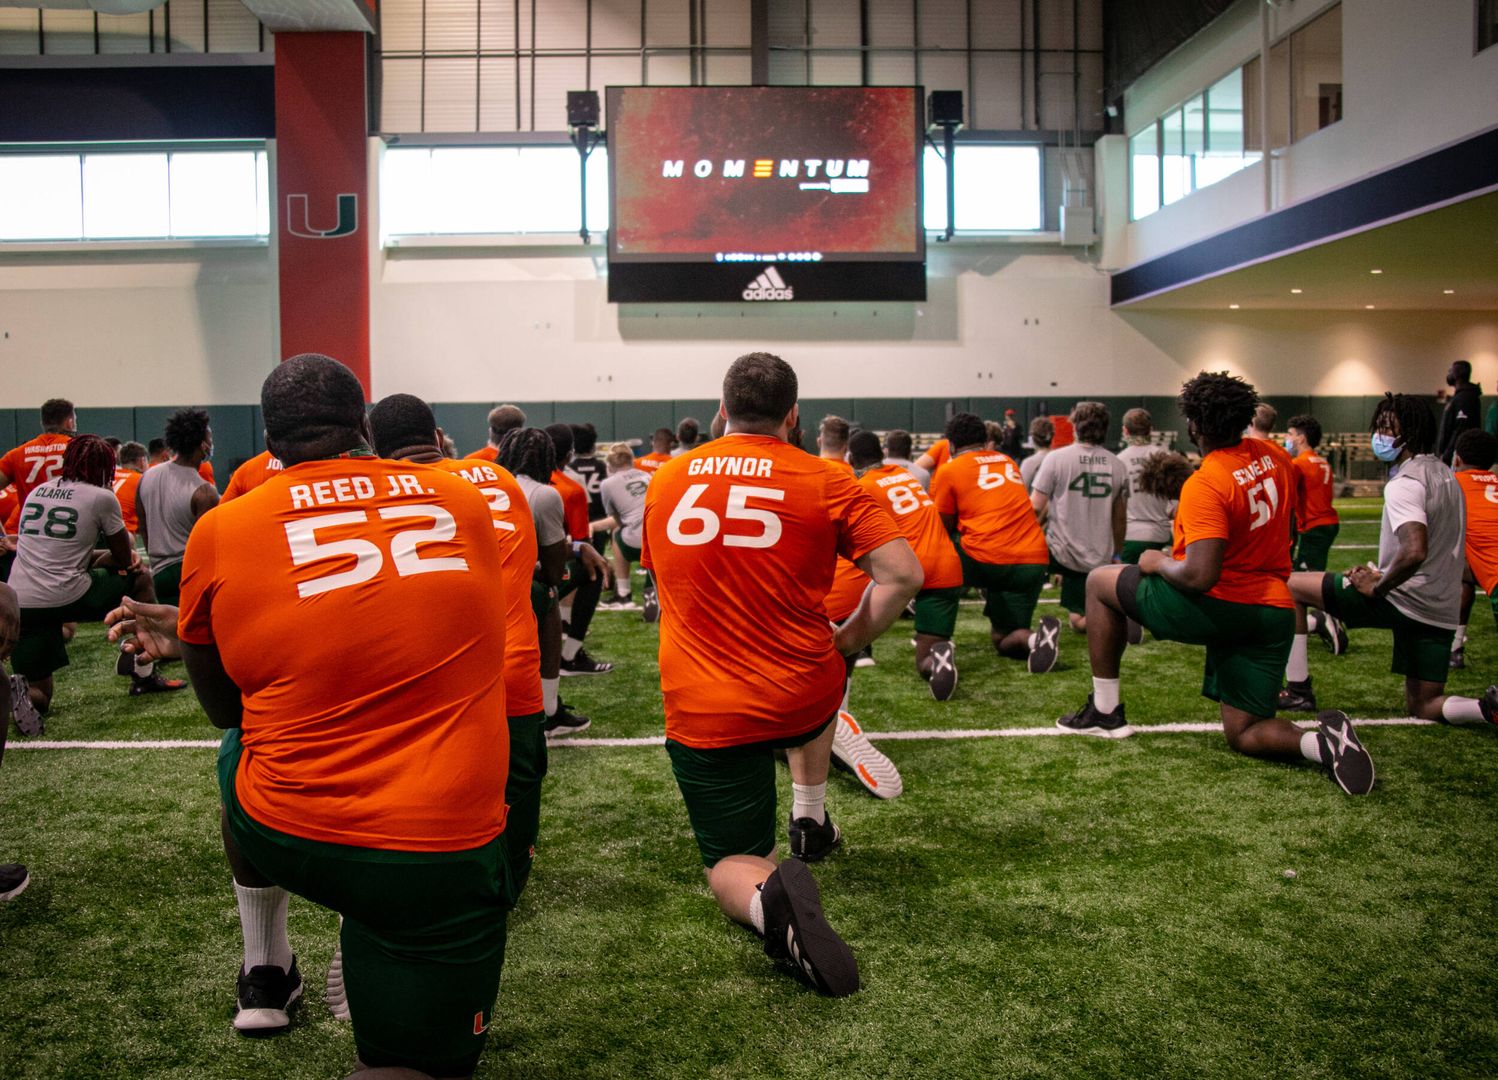 Miami Football and INFLCR Launch NIL Program 'Momentum'